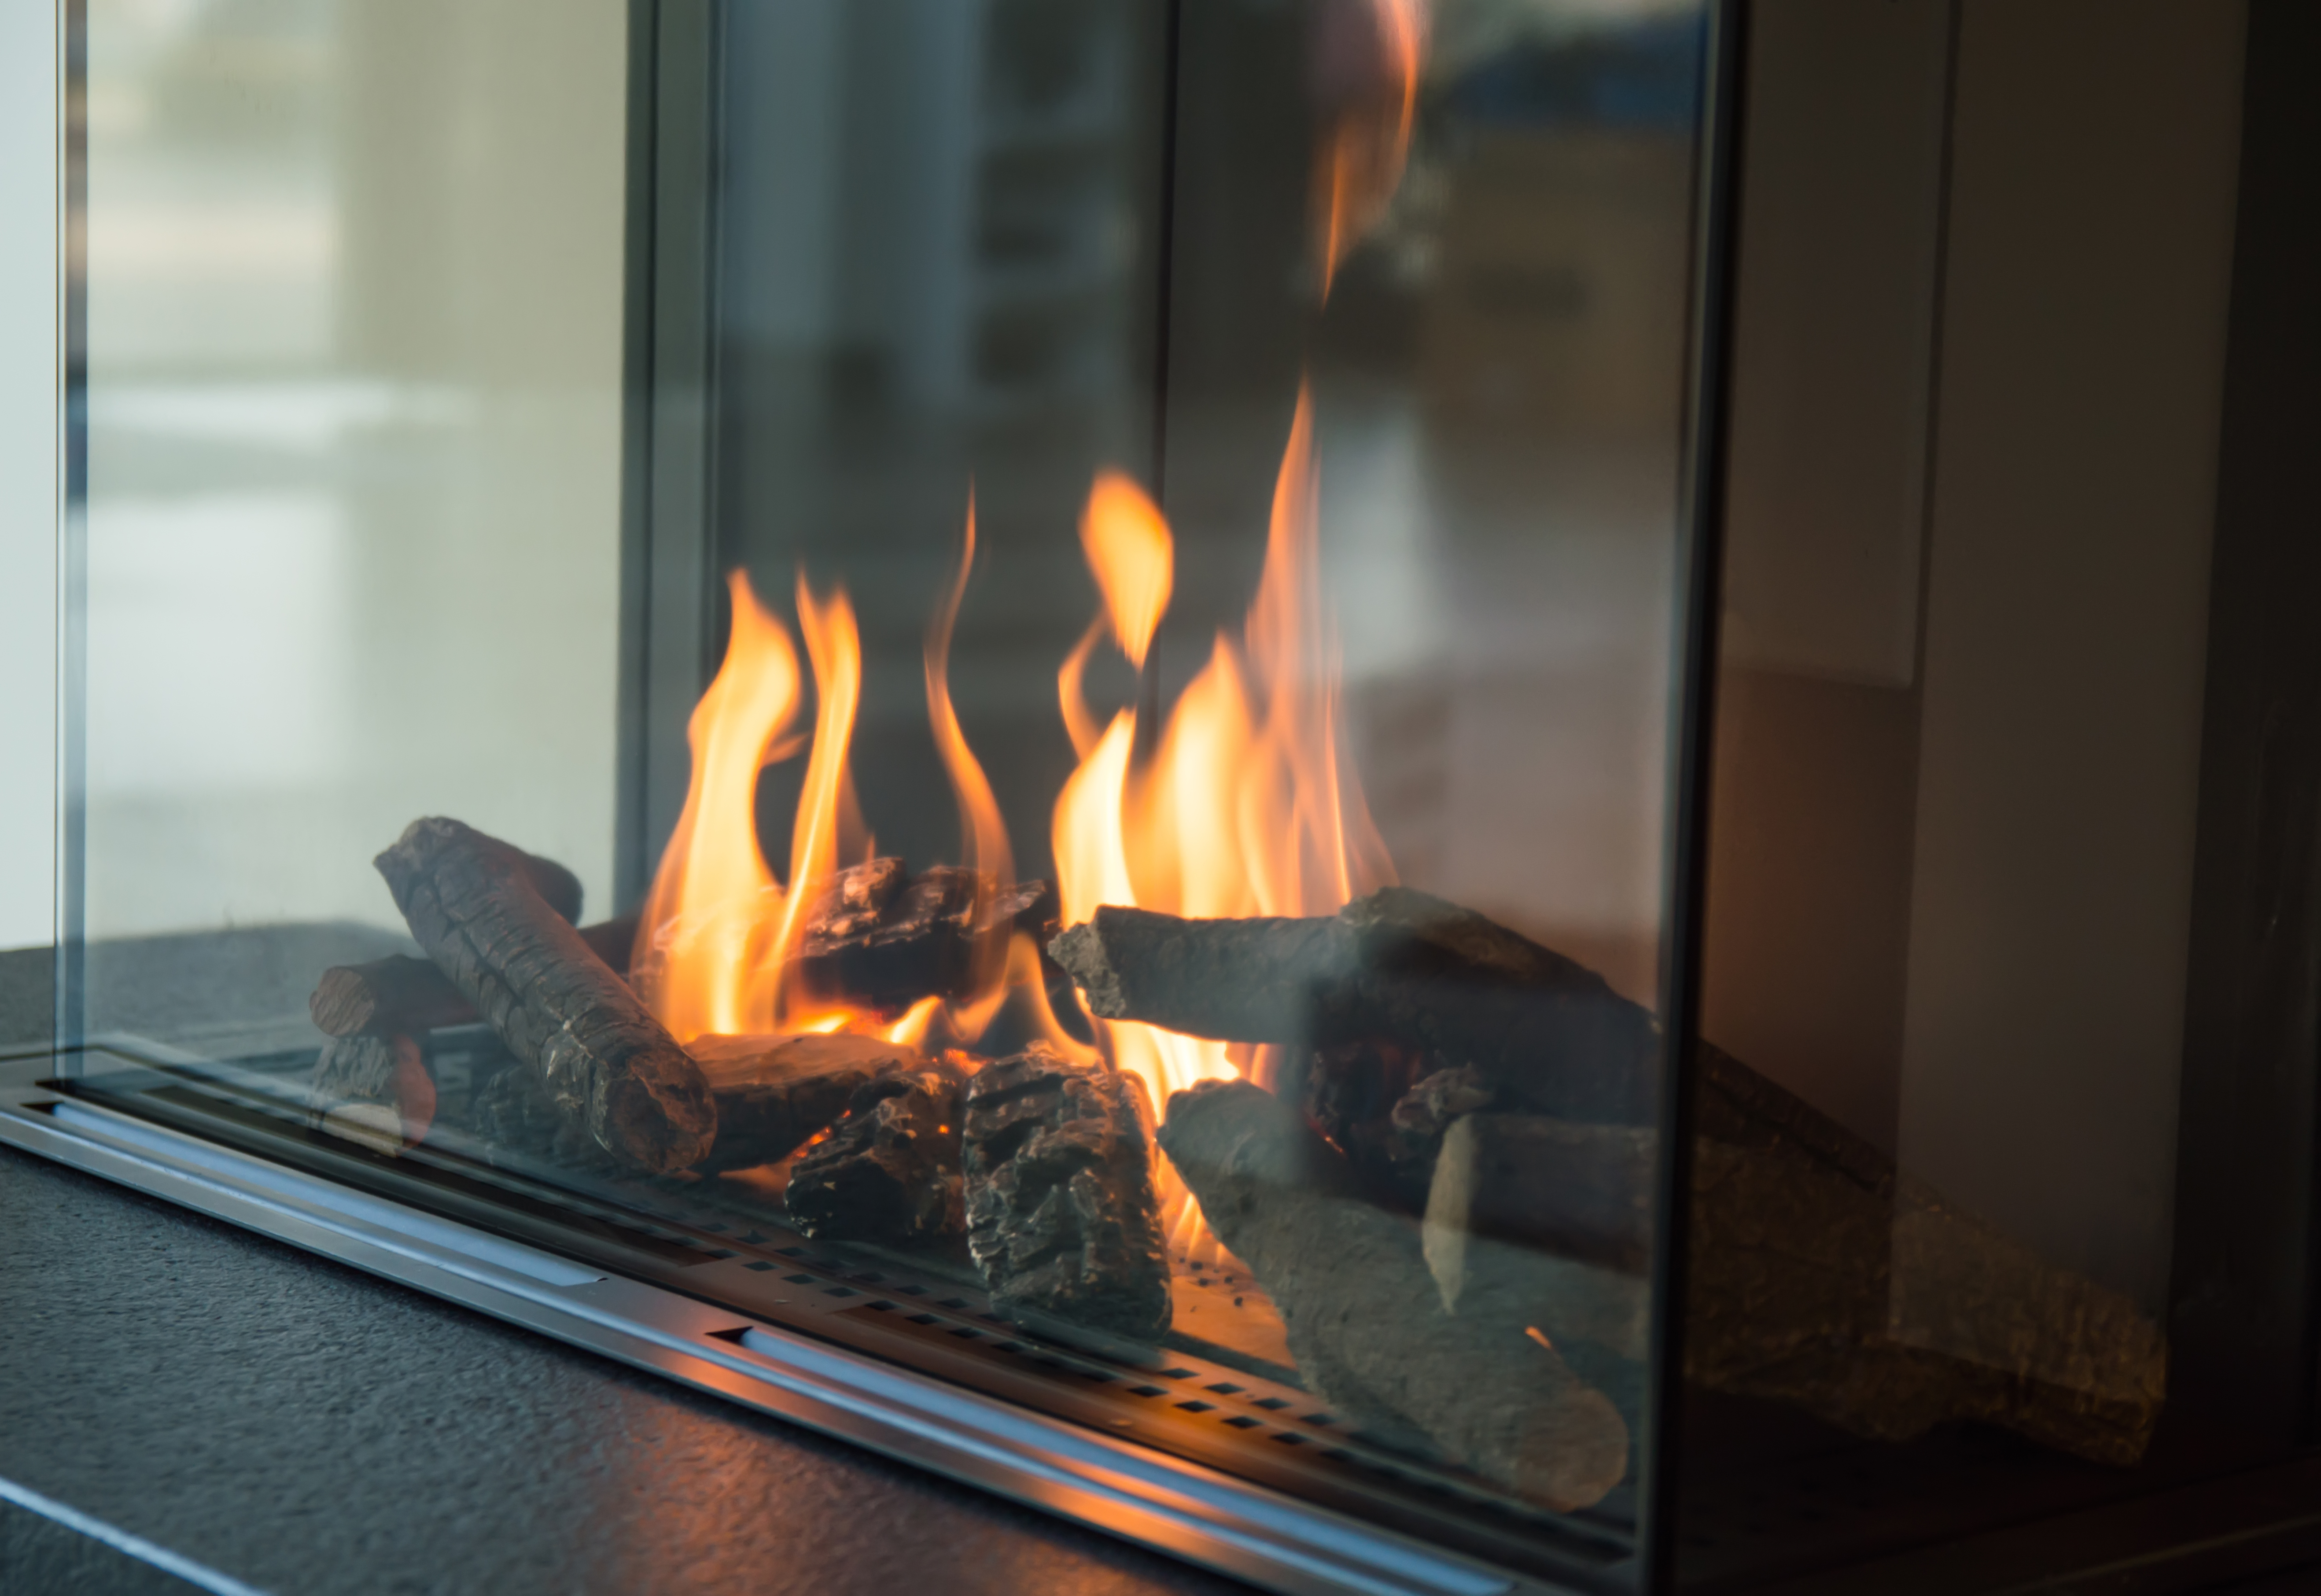 The Top Critical Tests in Gas Fireplace Maintenance